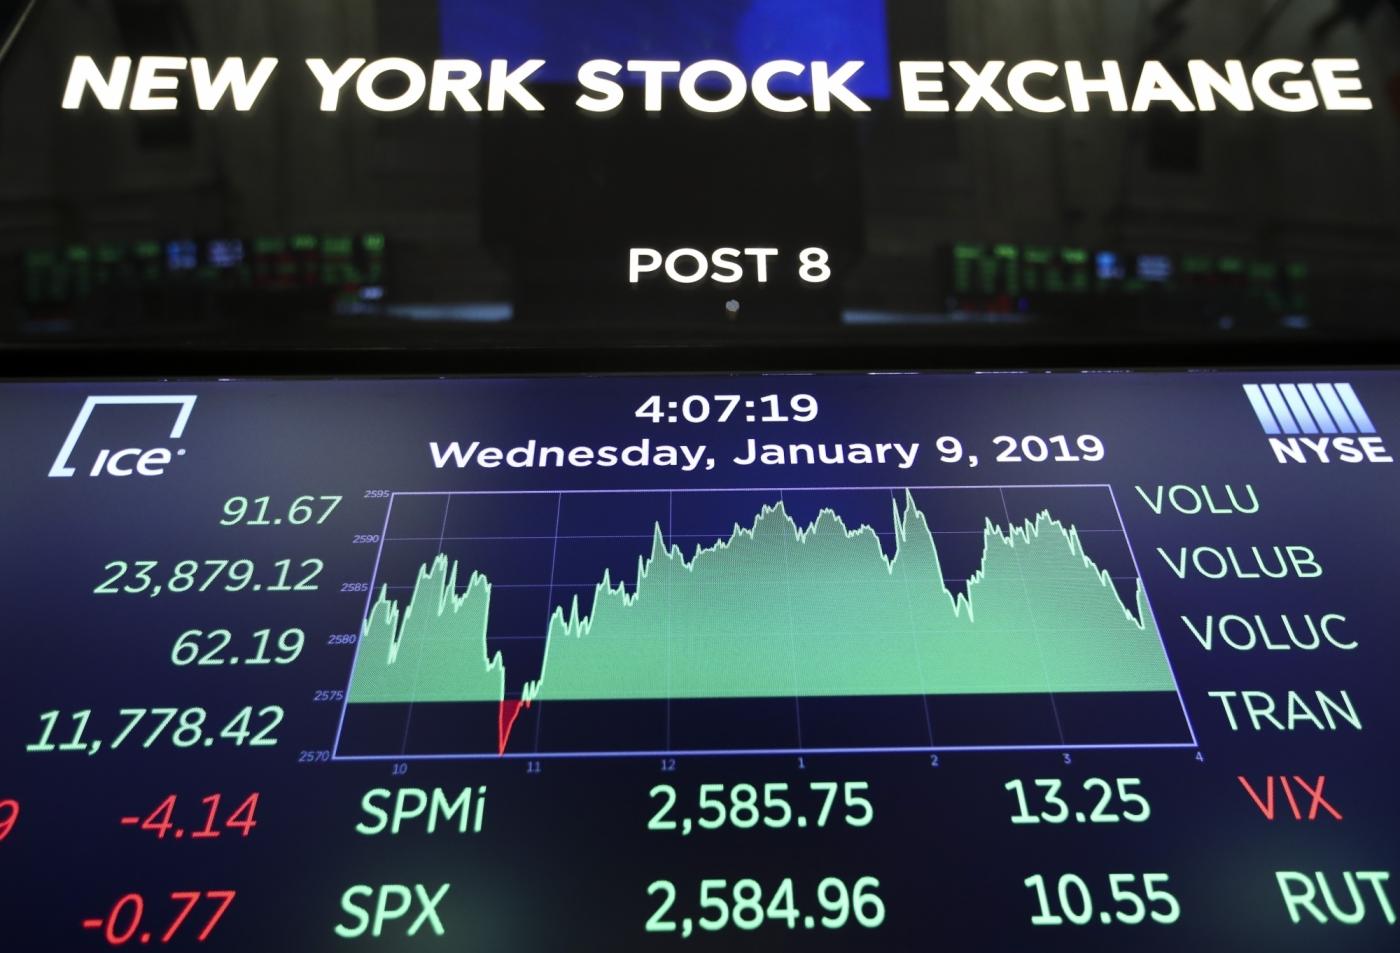 NEW YORK, Jan. 9, 2019 (Xinhua) -- An electronic screen shows the trading information at the New York Stock Exchange in New York, the United States, Jan. 9, 2019. U.S. stocks closed higher on Wednesday after the summary of Federal Reserve's meeting held in December showed the central bank is patient on rate hikes. The Dow Jones Industrial Average increased 91.67 points, or 0.39 percent, to 23,879.12. The S&P 500 was up 10.55 points, or 0.41 percent, to 2,584.96. The Nasdaq Composite Index was up 60.08 points, or 0.87 percent, to 6,957.08. (Xinhua/Wang Ying/IANS) by .